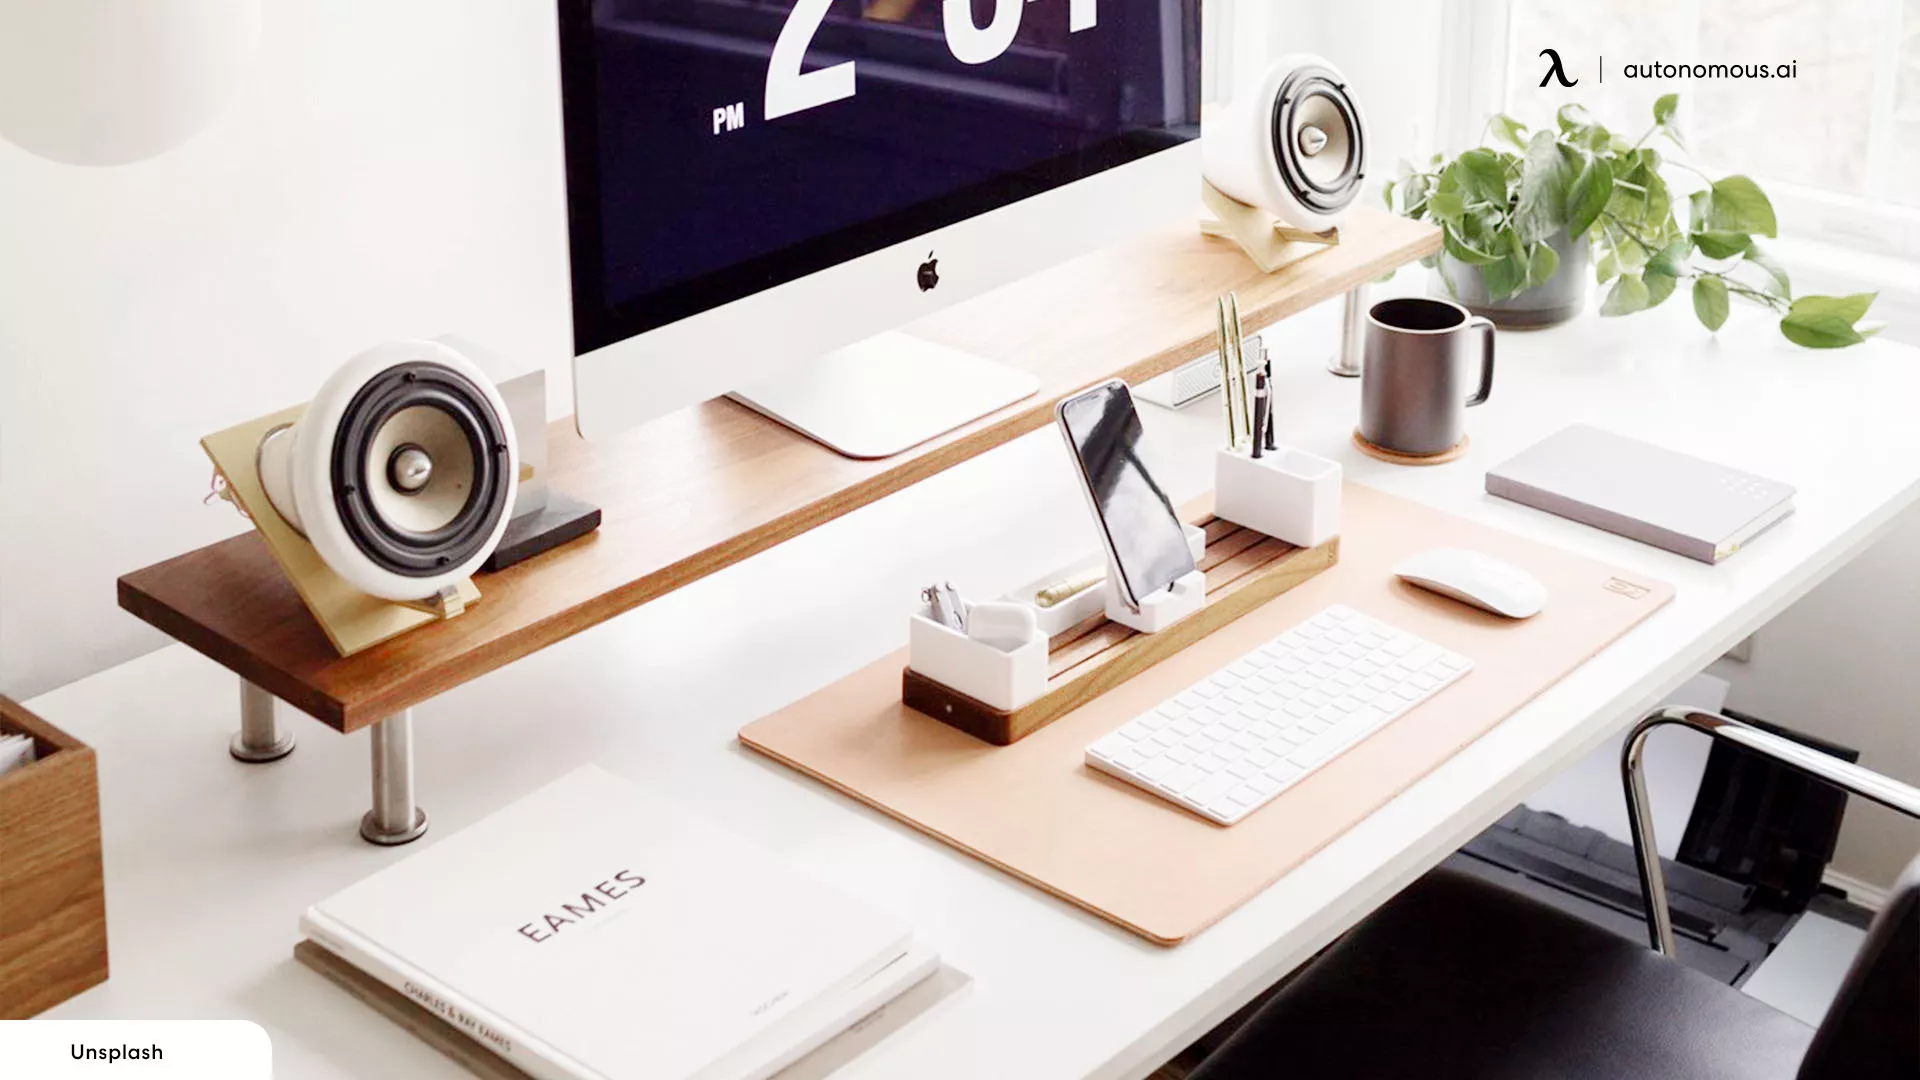 Finding the Ultimate Desk Organizer